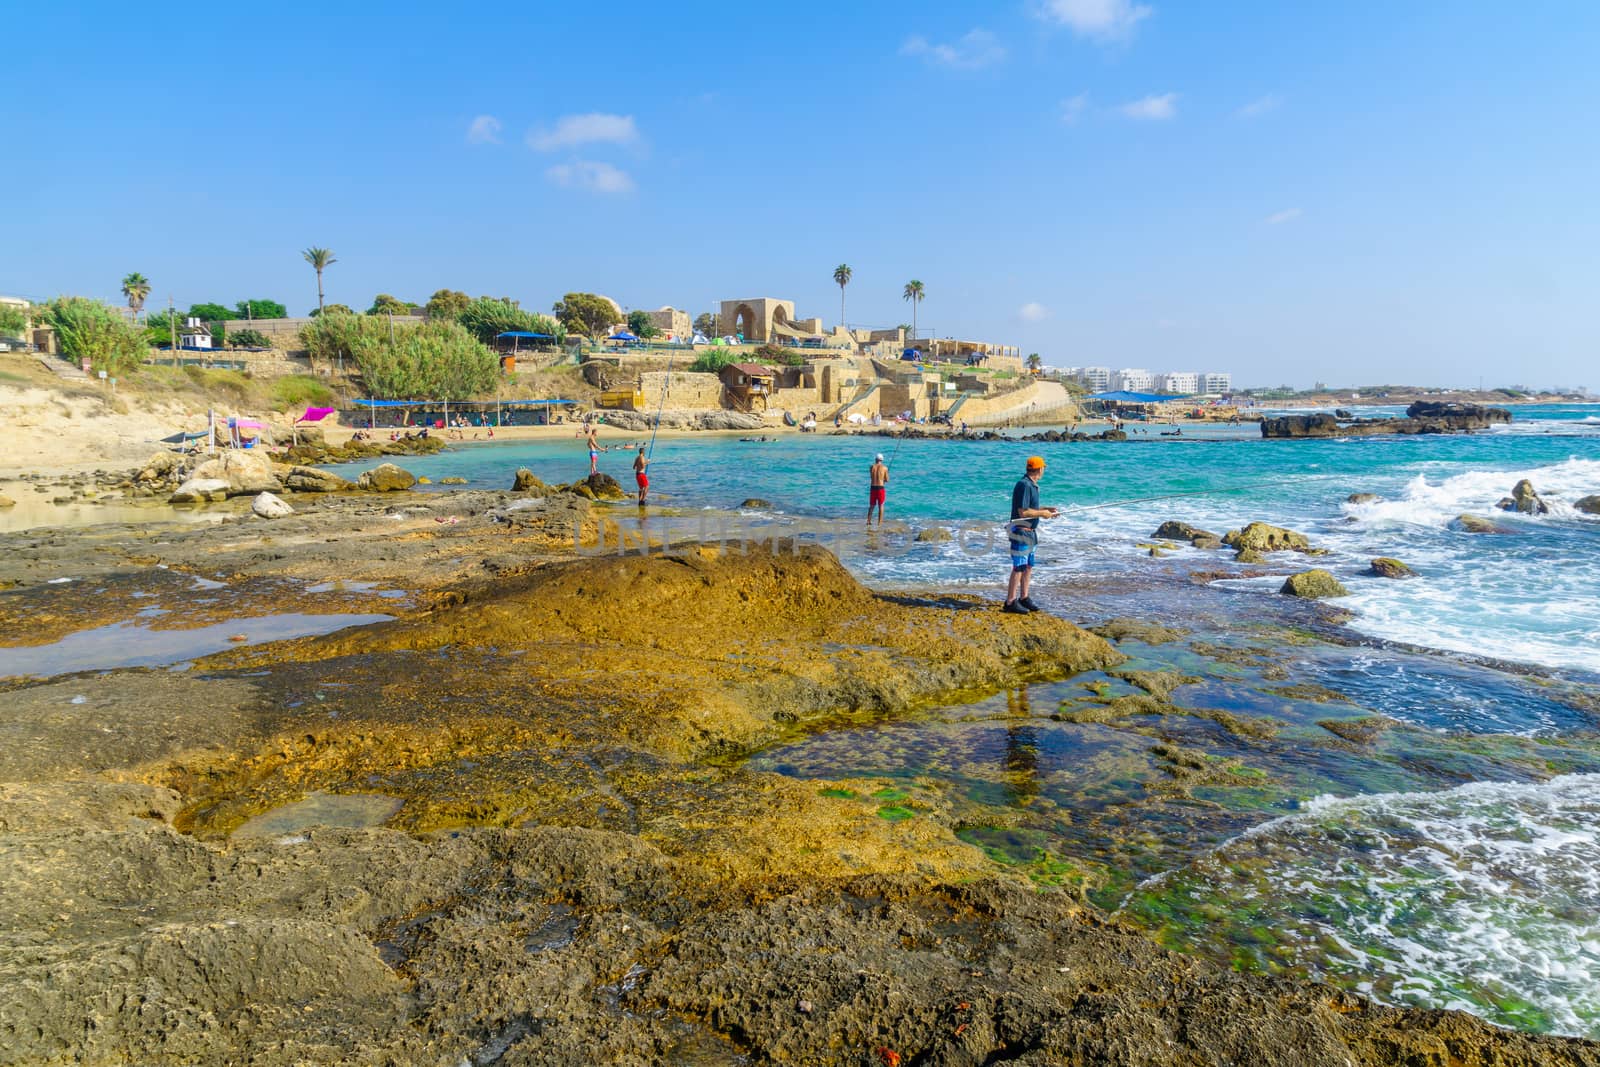 Achziv, Israel - July 22, 2020: View of visitors fishing and bathing, bay, coast, and old buildings, in Achziv national park, northern Israel